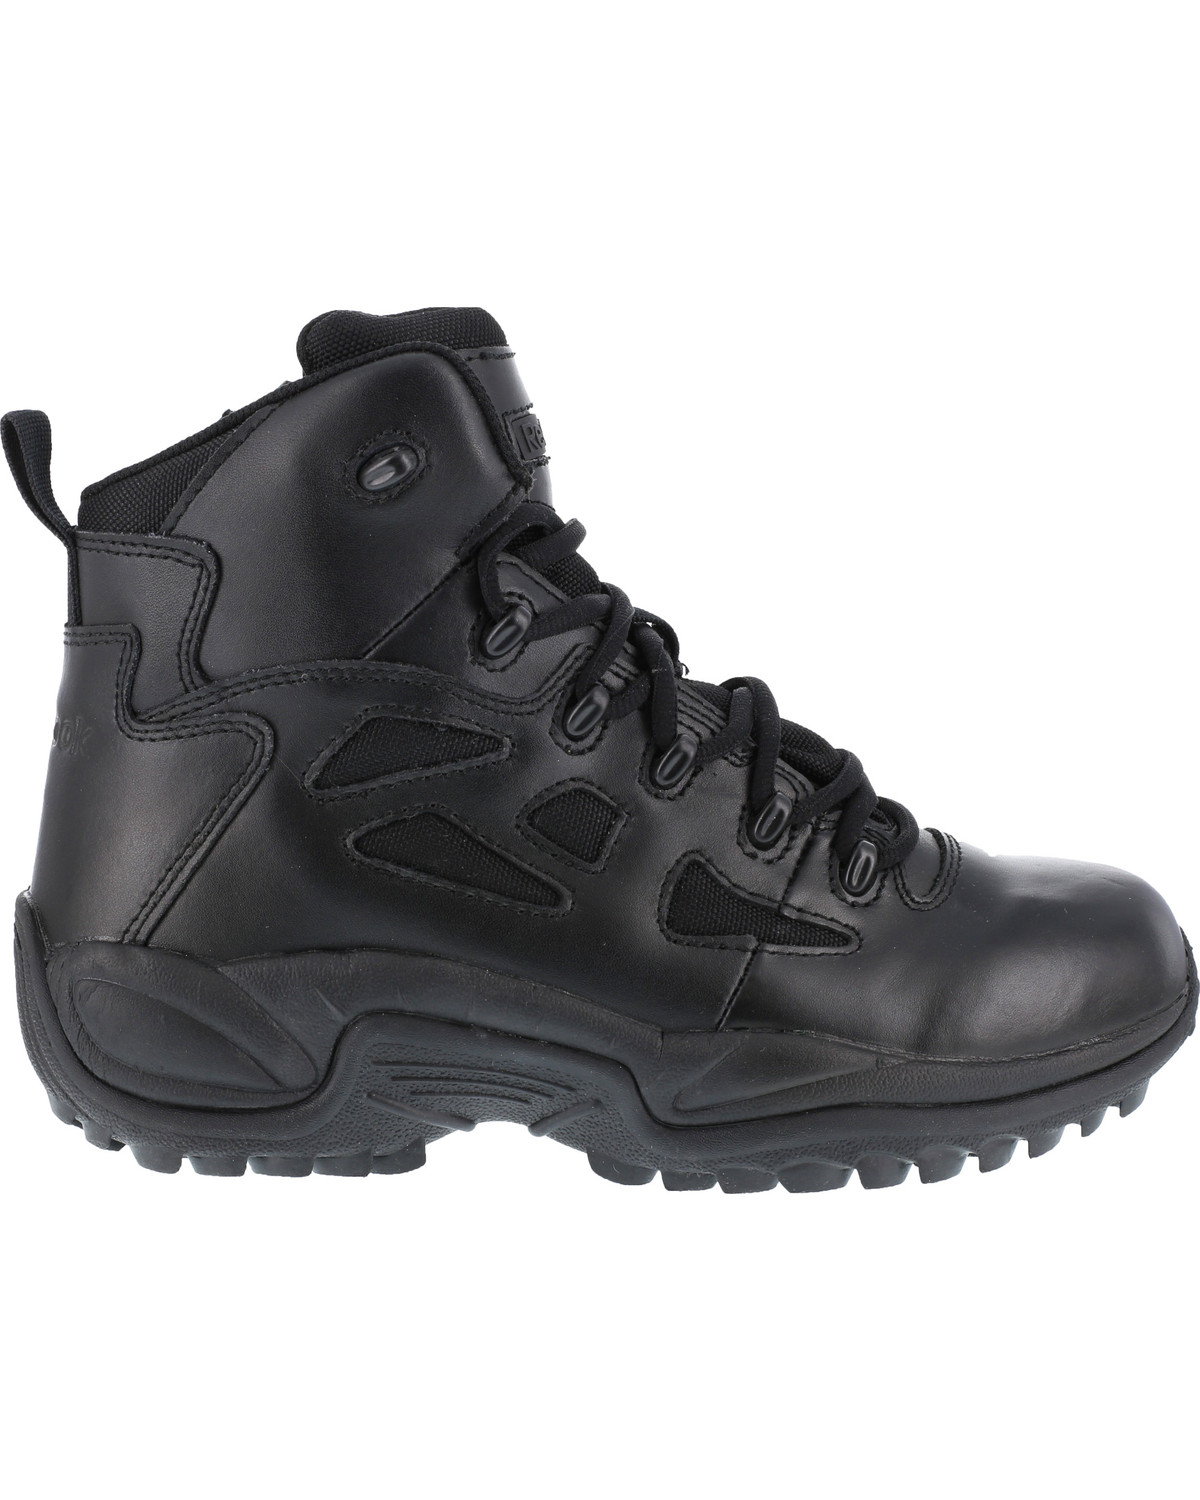 Reebok Work  Mens Rapid Response Rb 6 Inch Side Zip   Work Safety Shoes Casual - image 3 of 5